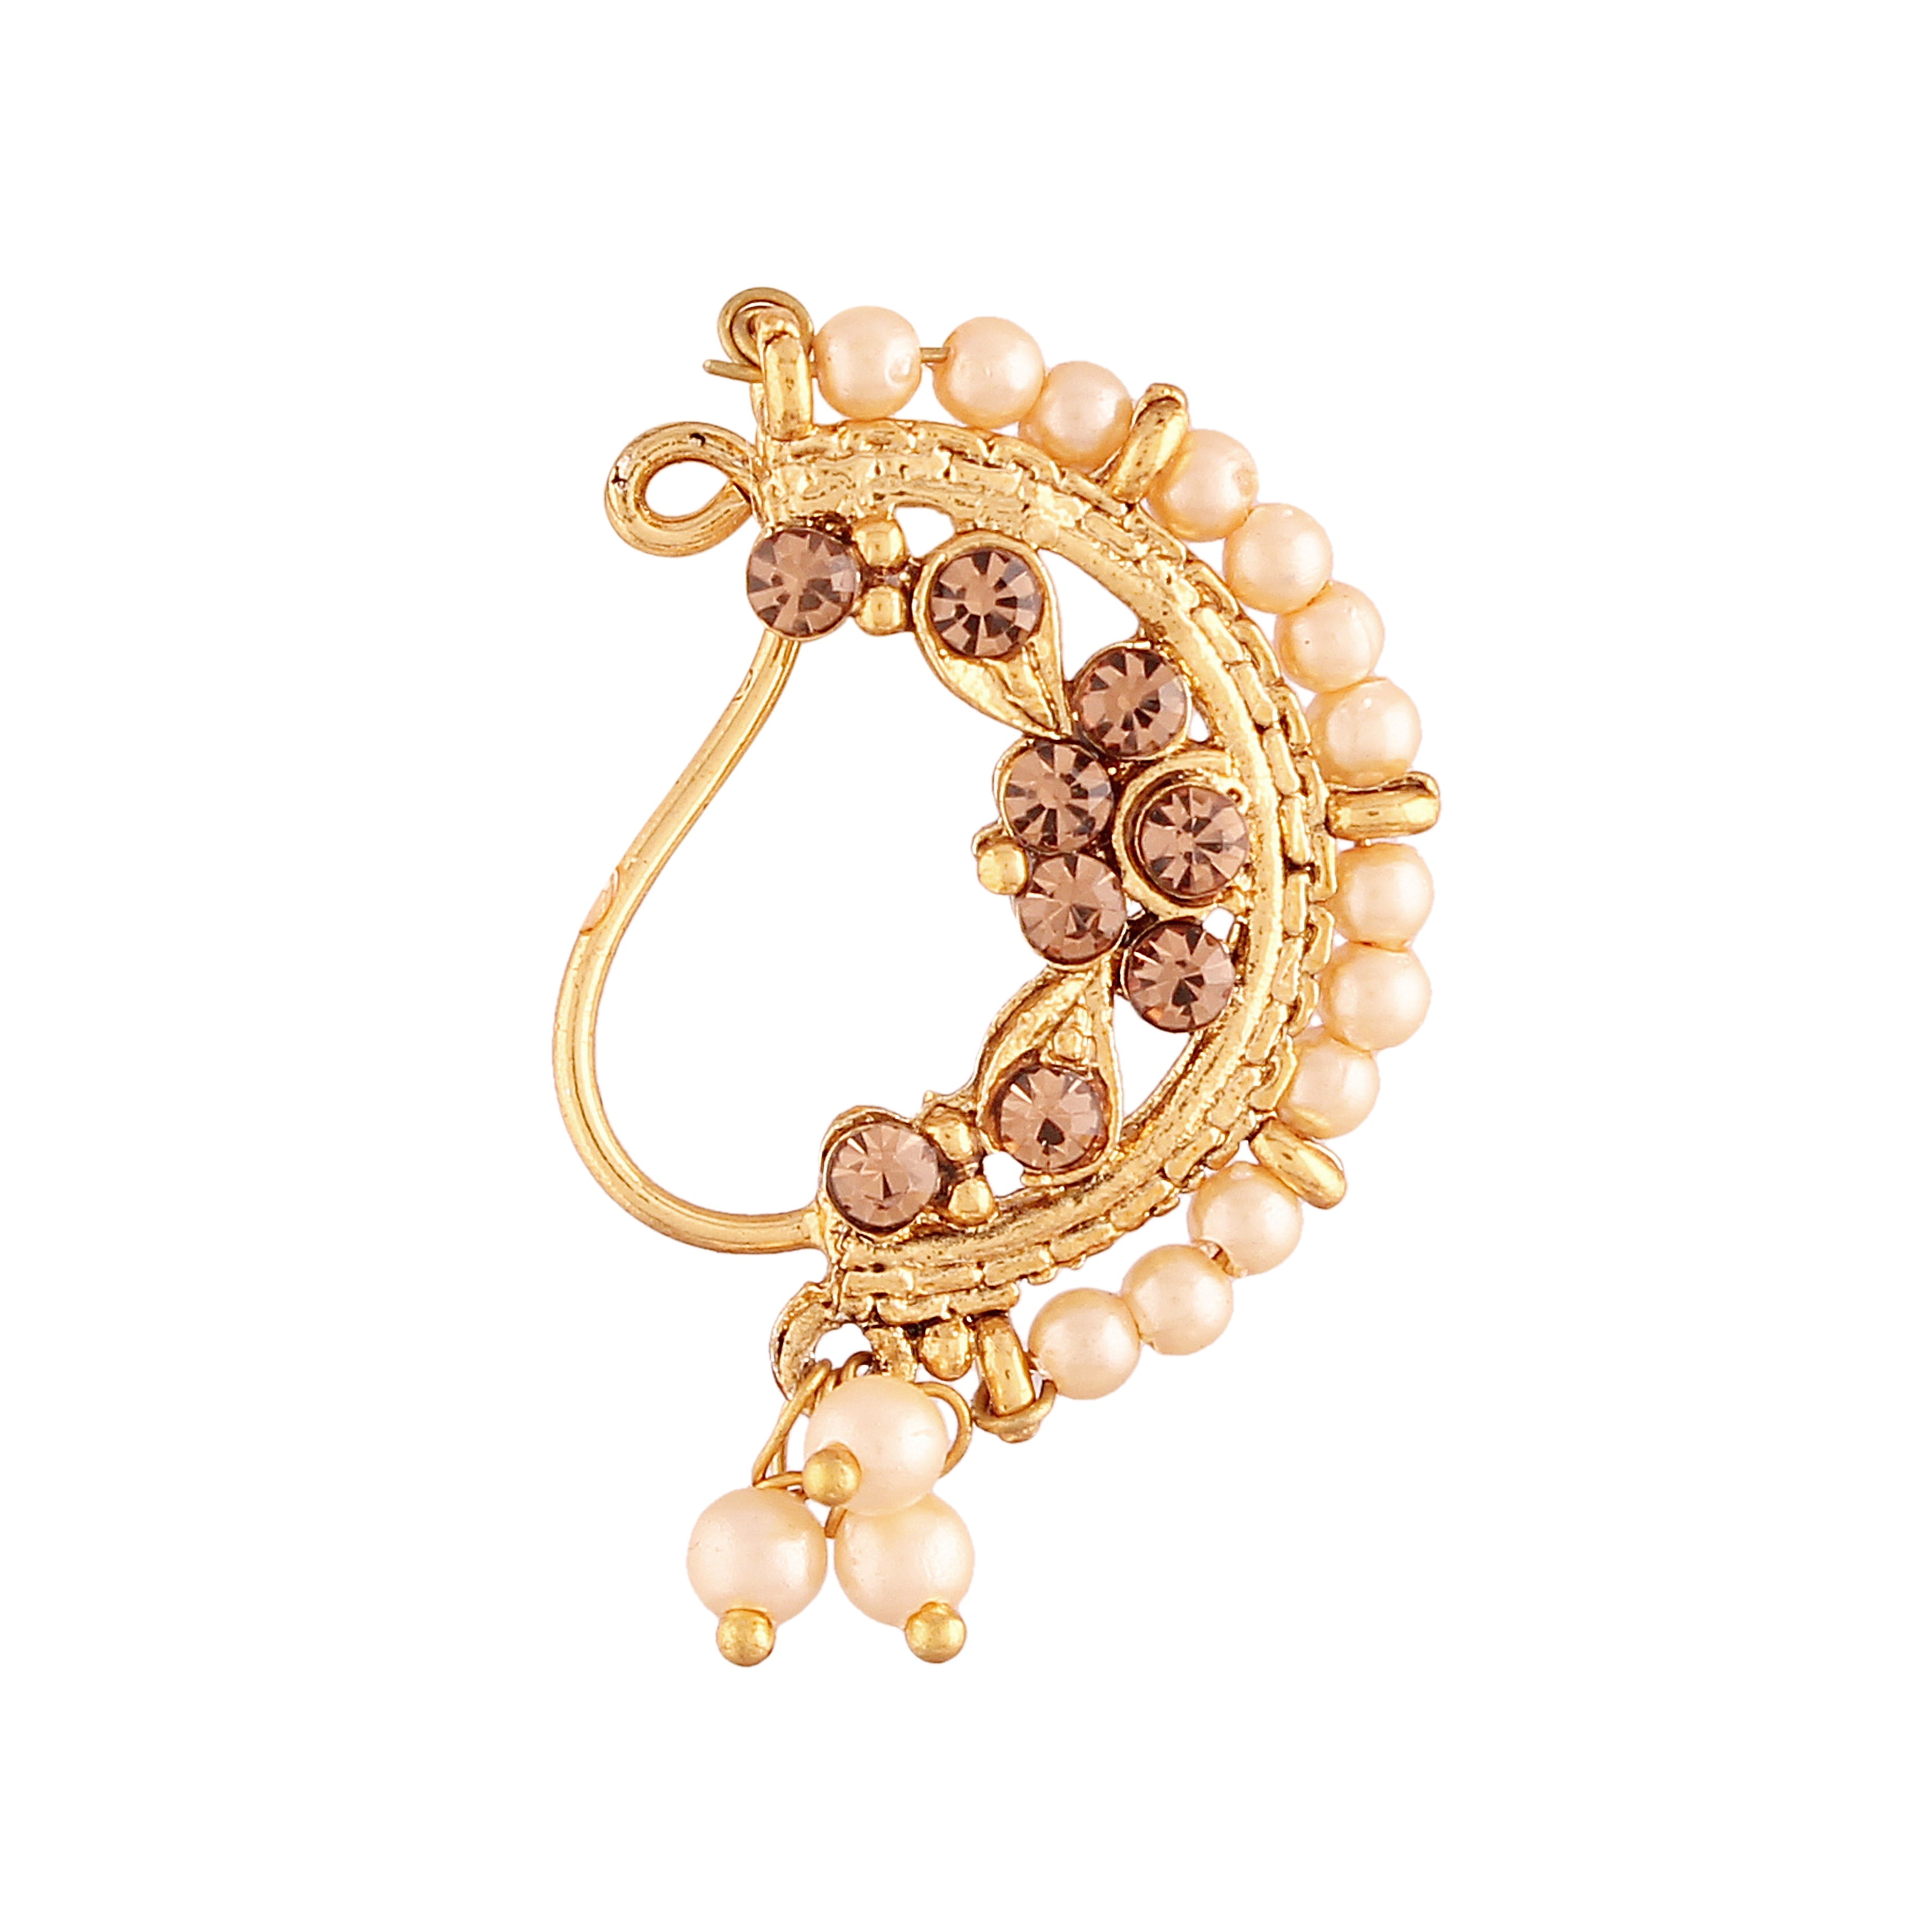 Maharashtrian Nose Ring For Women By I Jewels